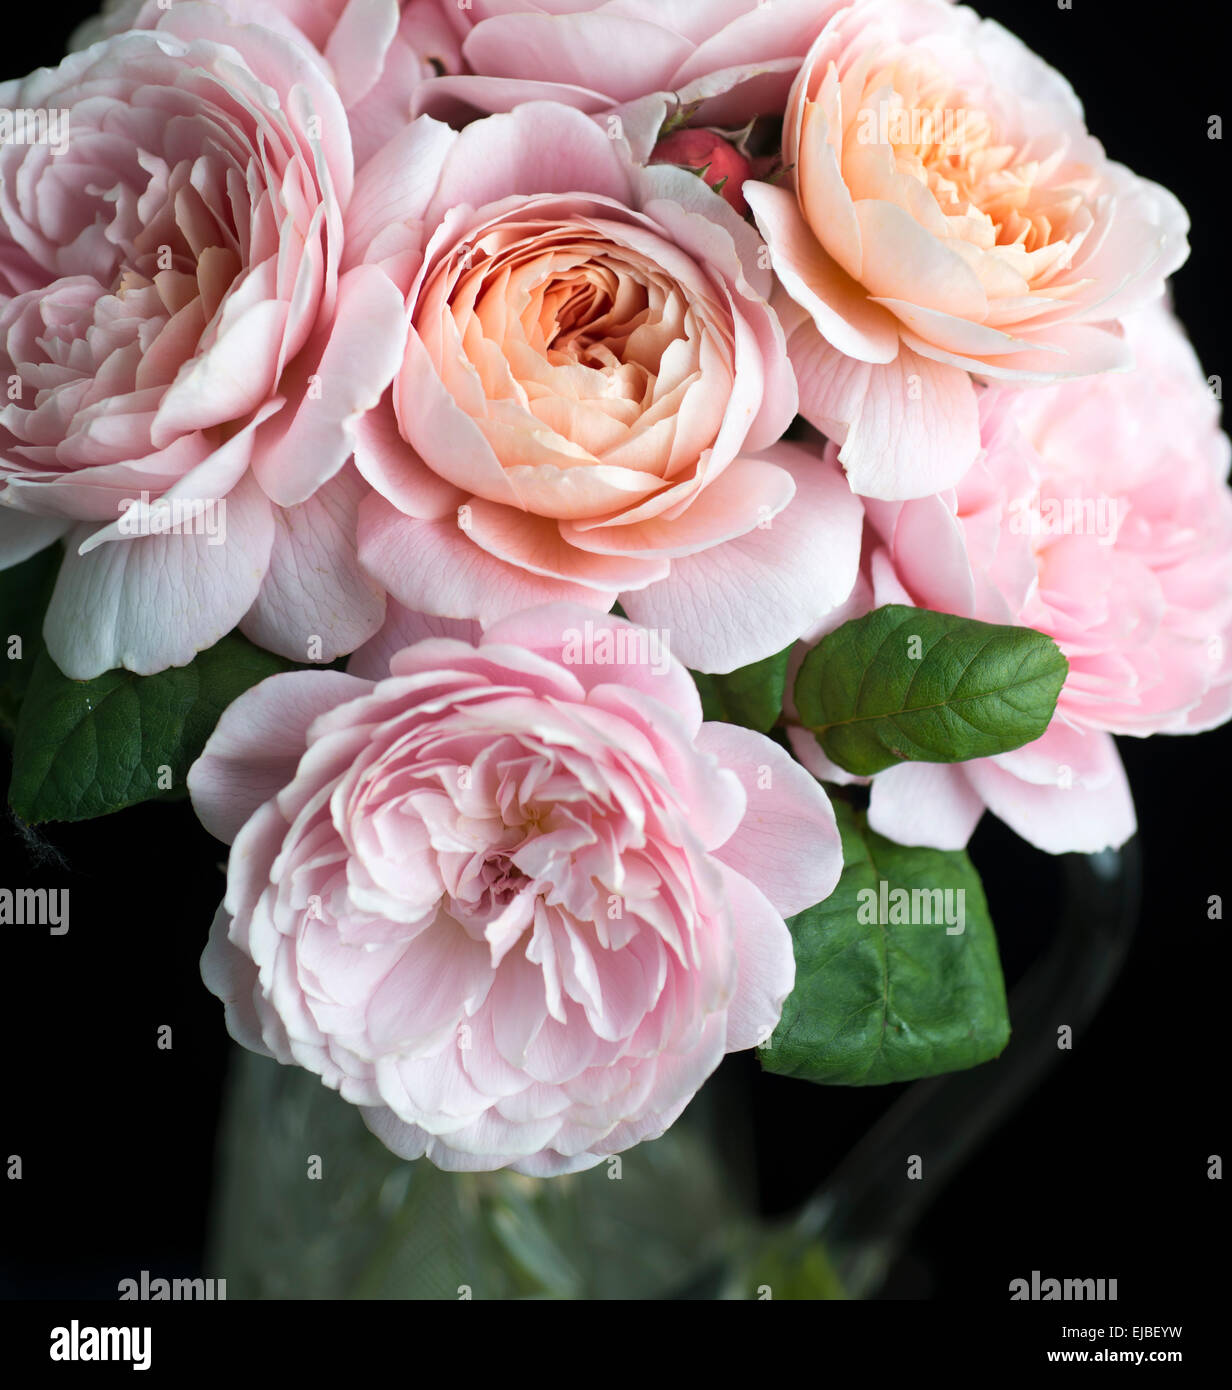 Rosa Queen of Sweden, a David Austin English rose, cut and in vase Stock Photo